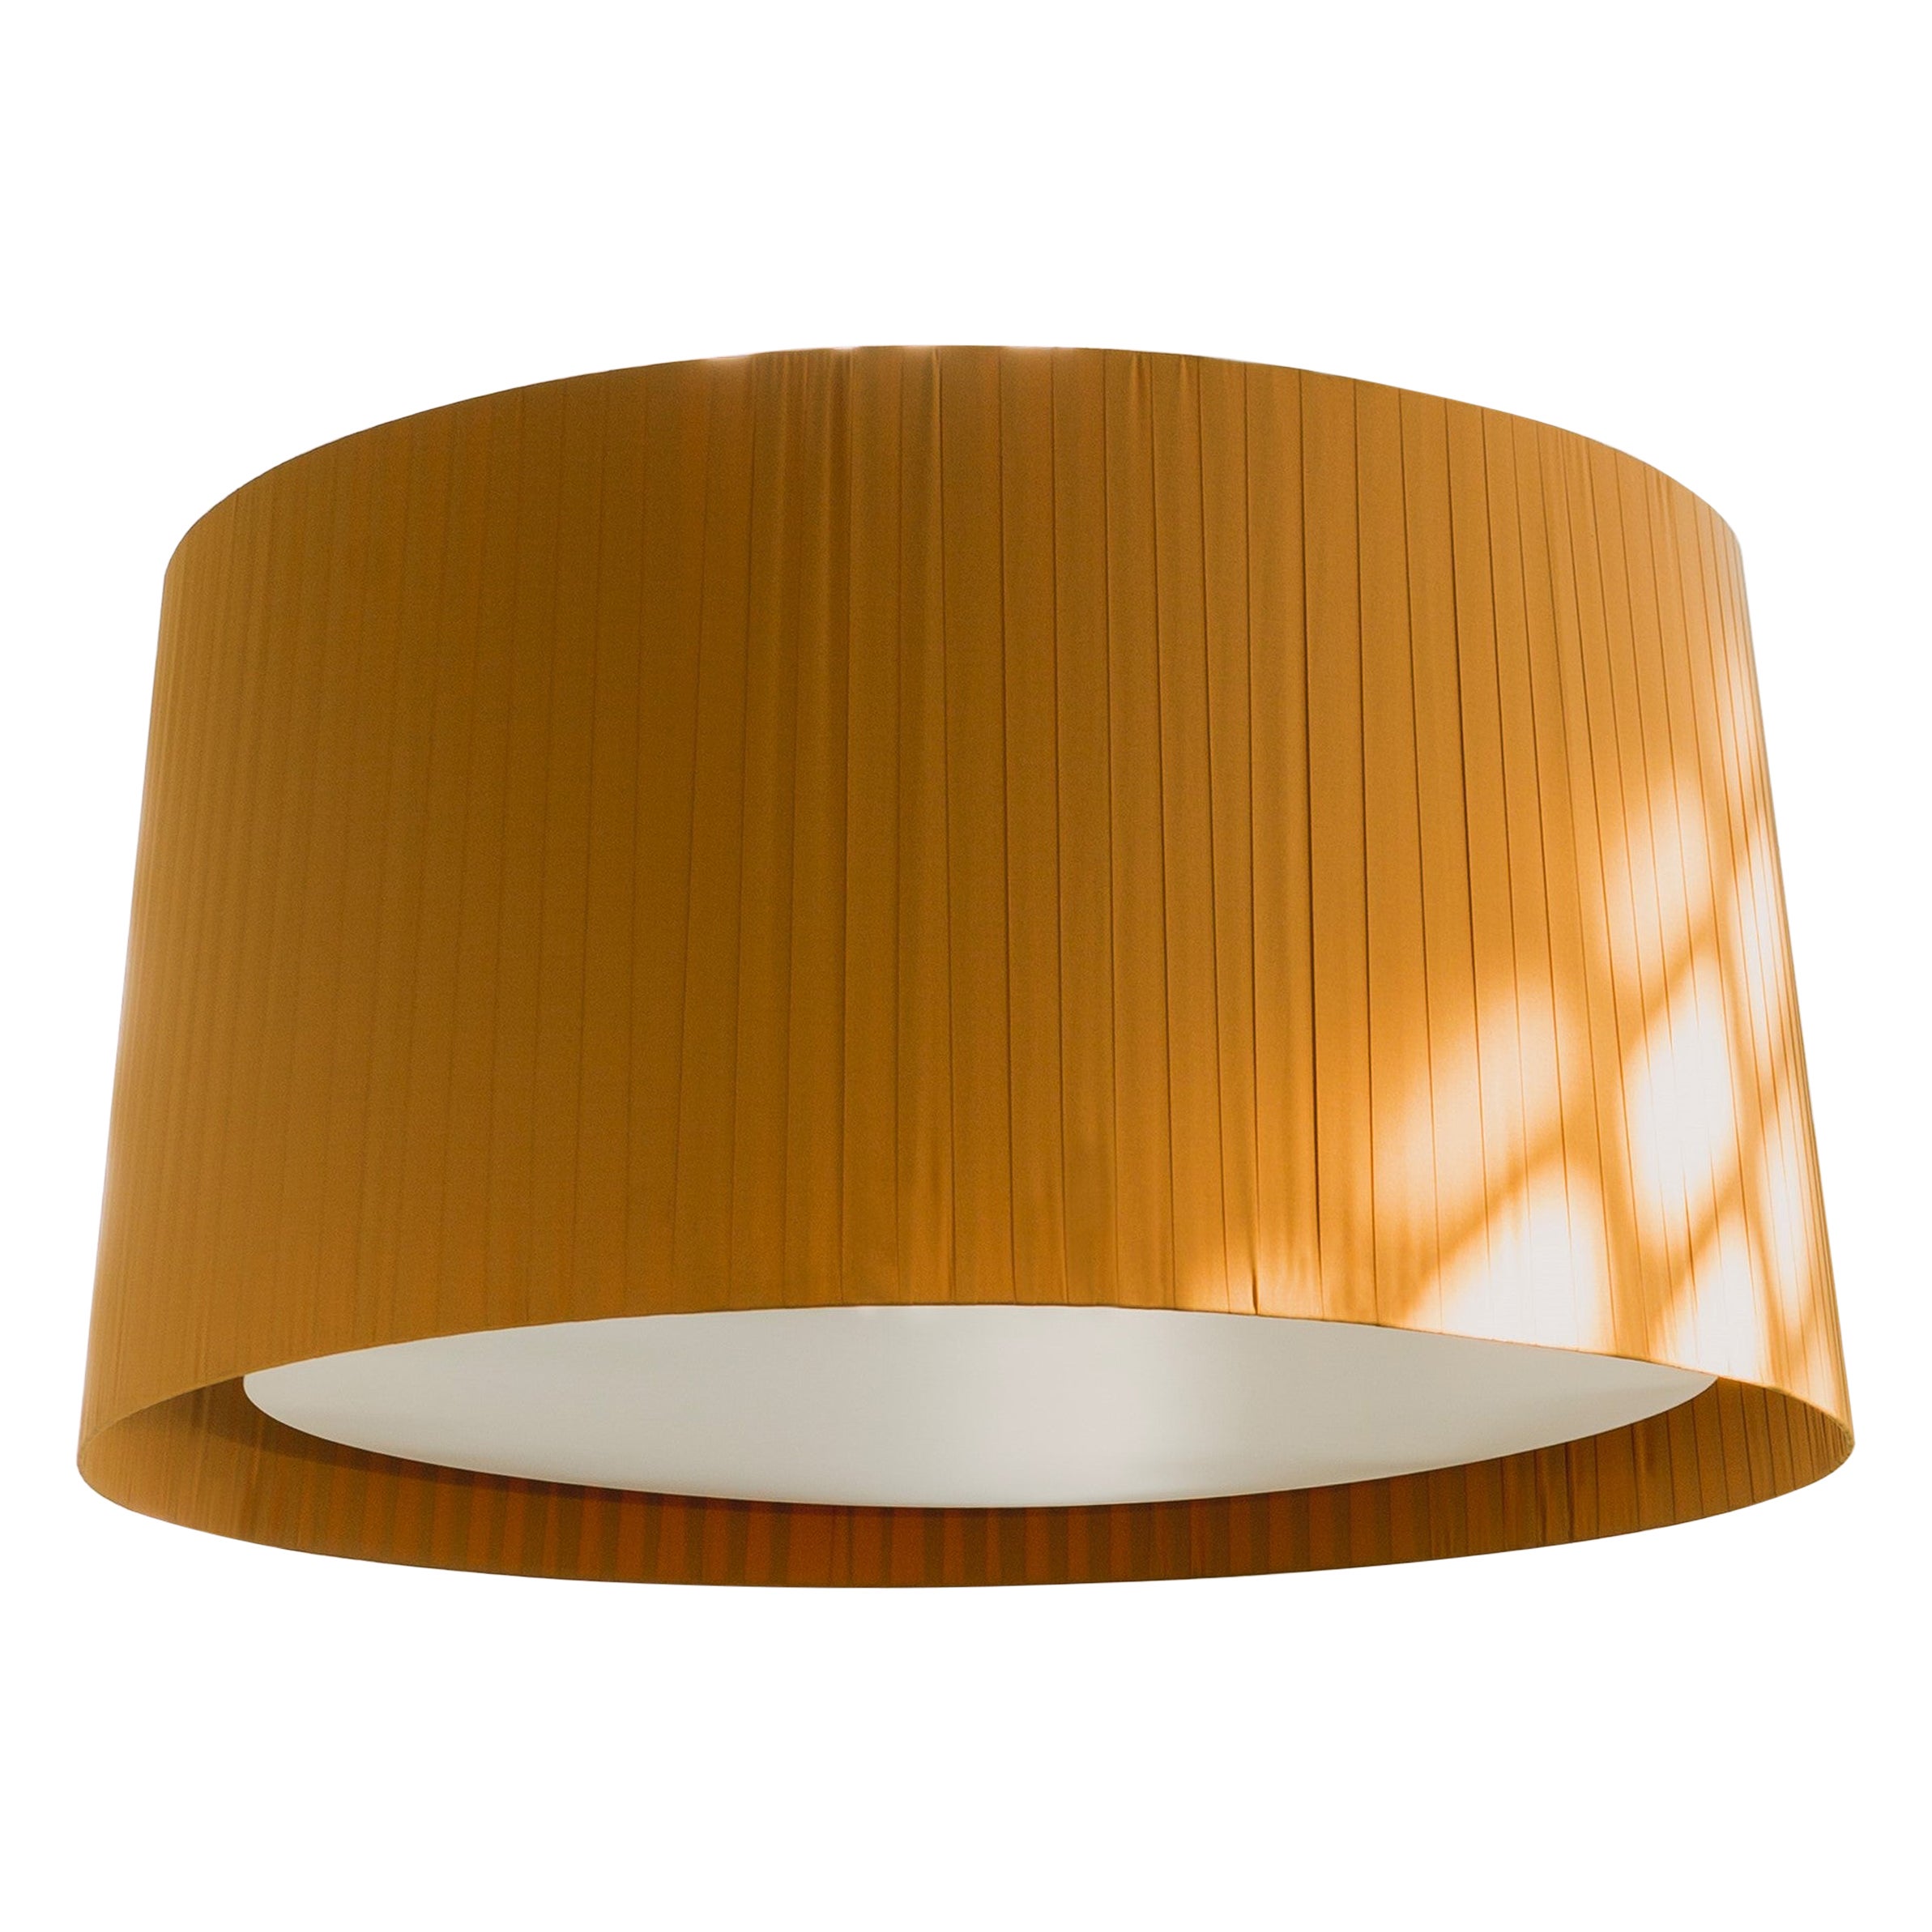 Mustard GT1500 Pendant Lamp by Santa & Cole For Sale